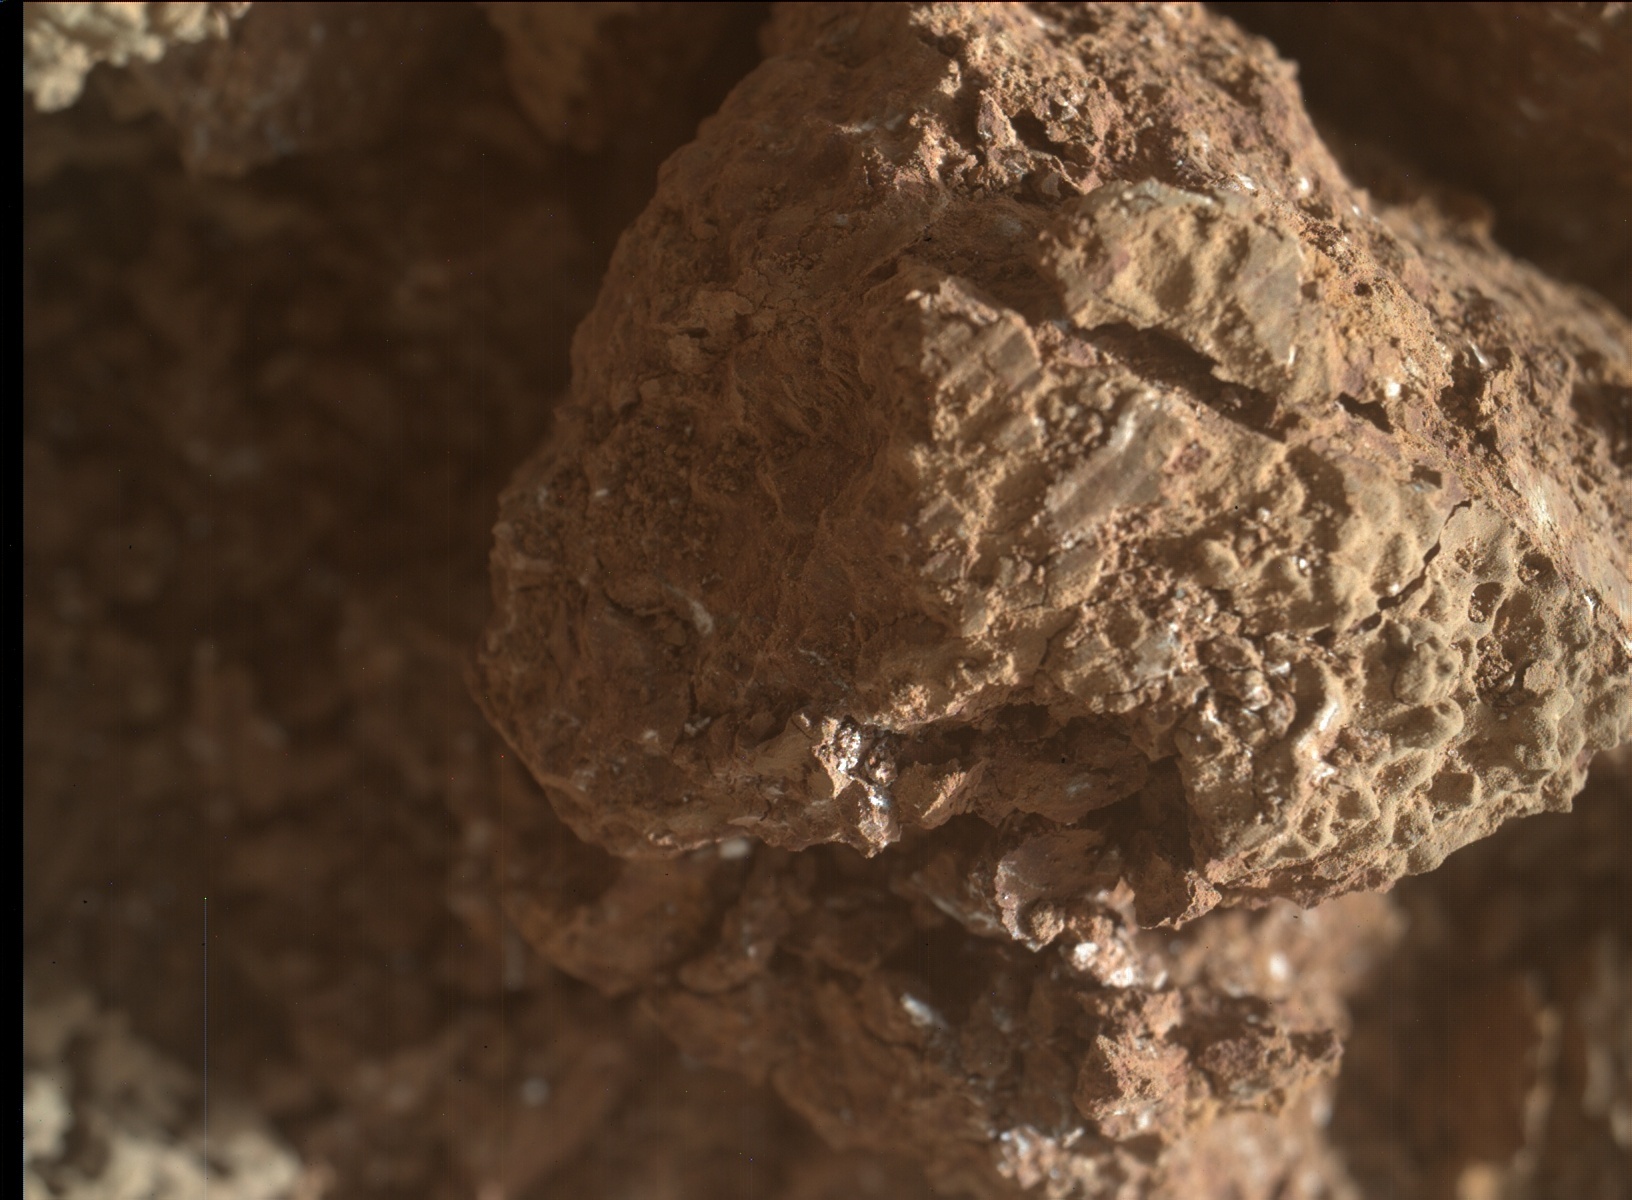 This image shows the inside of some nodules Curiosity crushed and drove over. This colored image shows a brown rock with straight imprinted lines in the middle of flattened areas that appear slightly more grey. There are also visible cracks, especially clearly on the right of the nodule in the image.